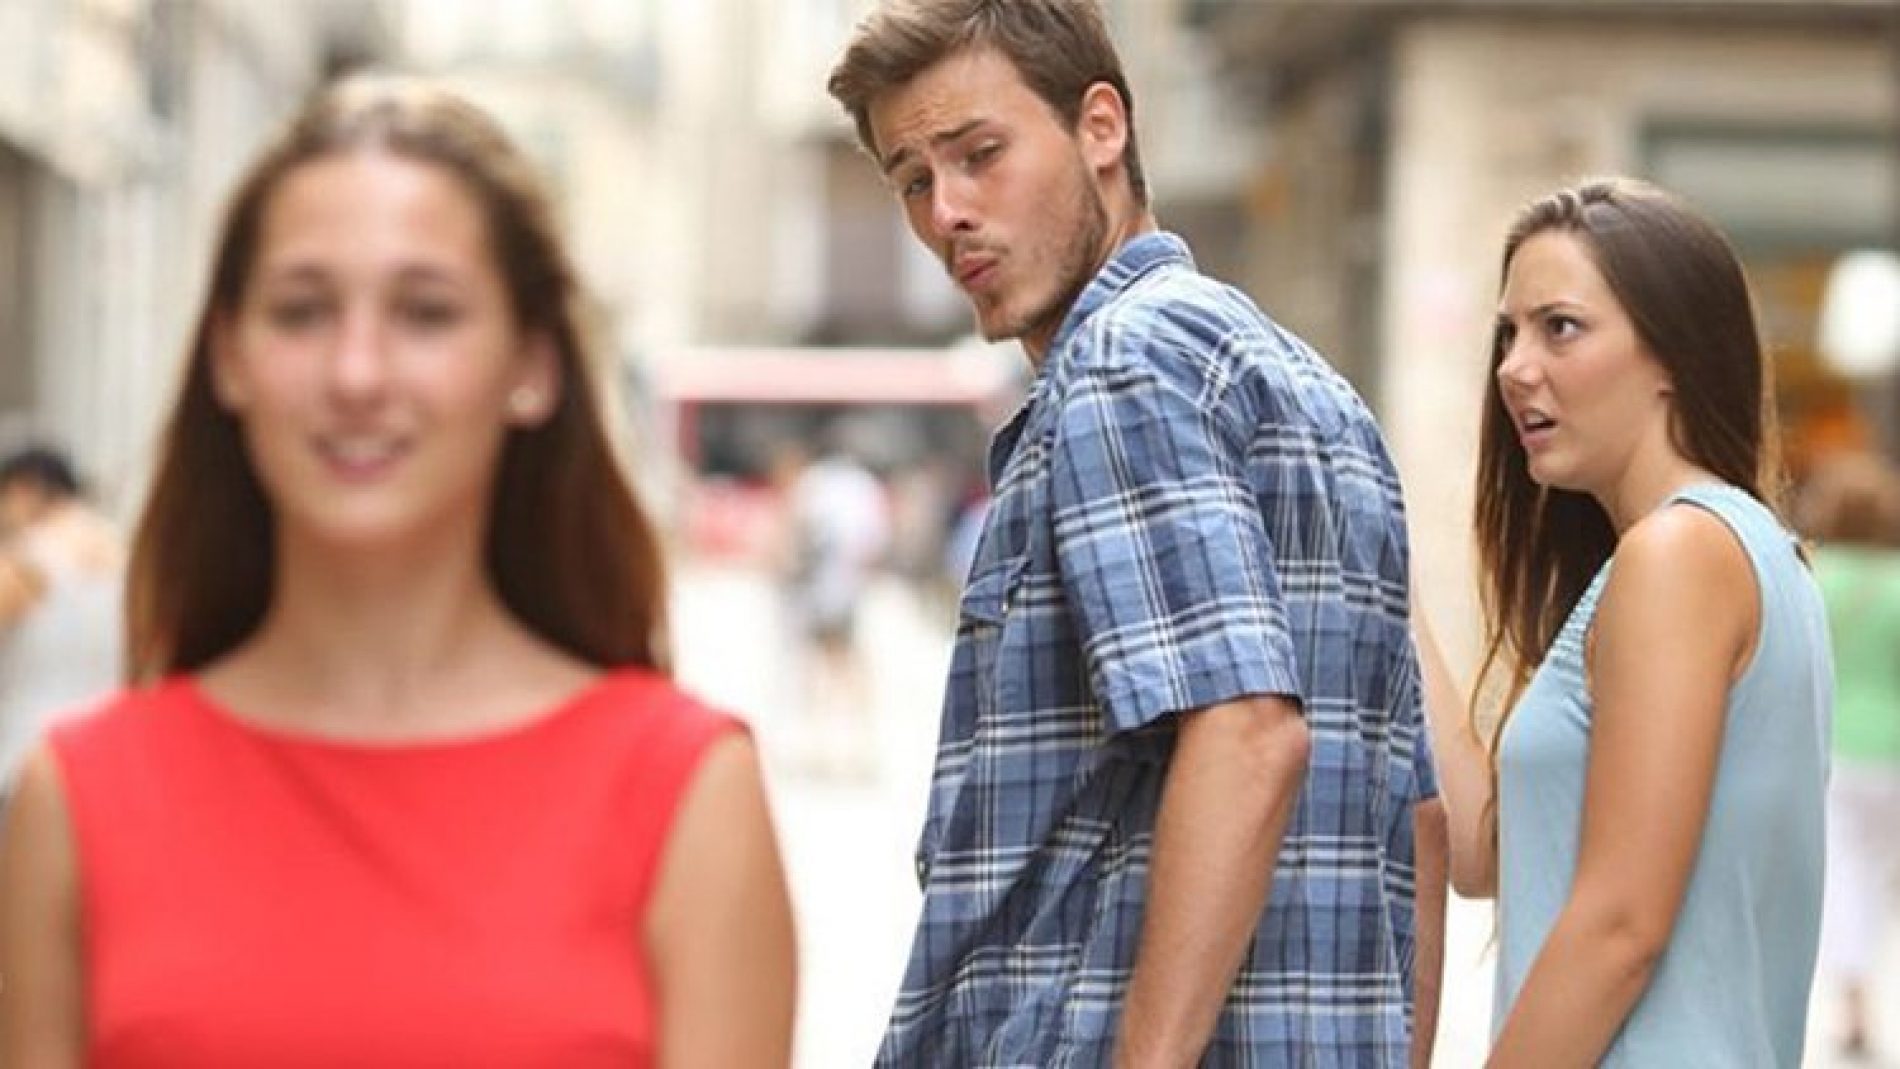 The Distracted Boyfriend Meme Got a Very Gay Happy Ending